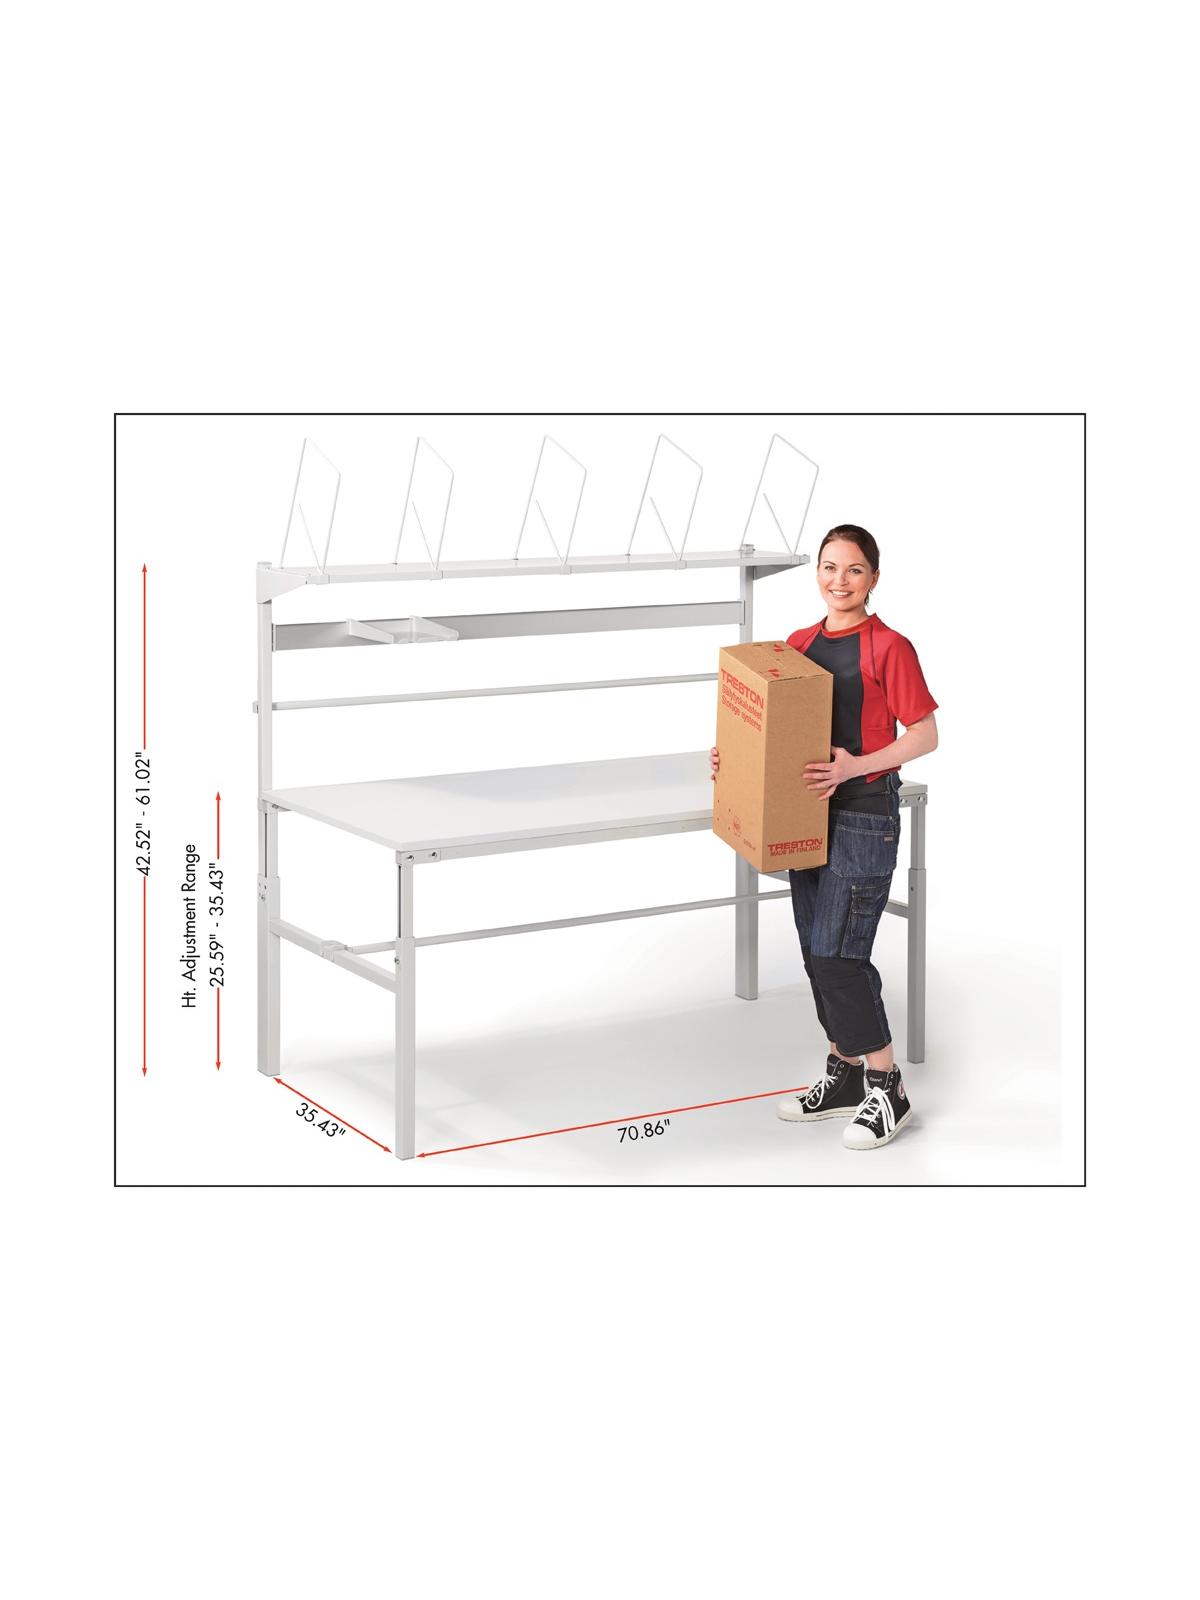 SOVELLA'S TP PACKING BENCH